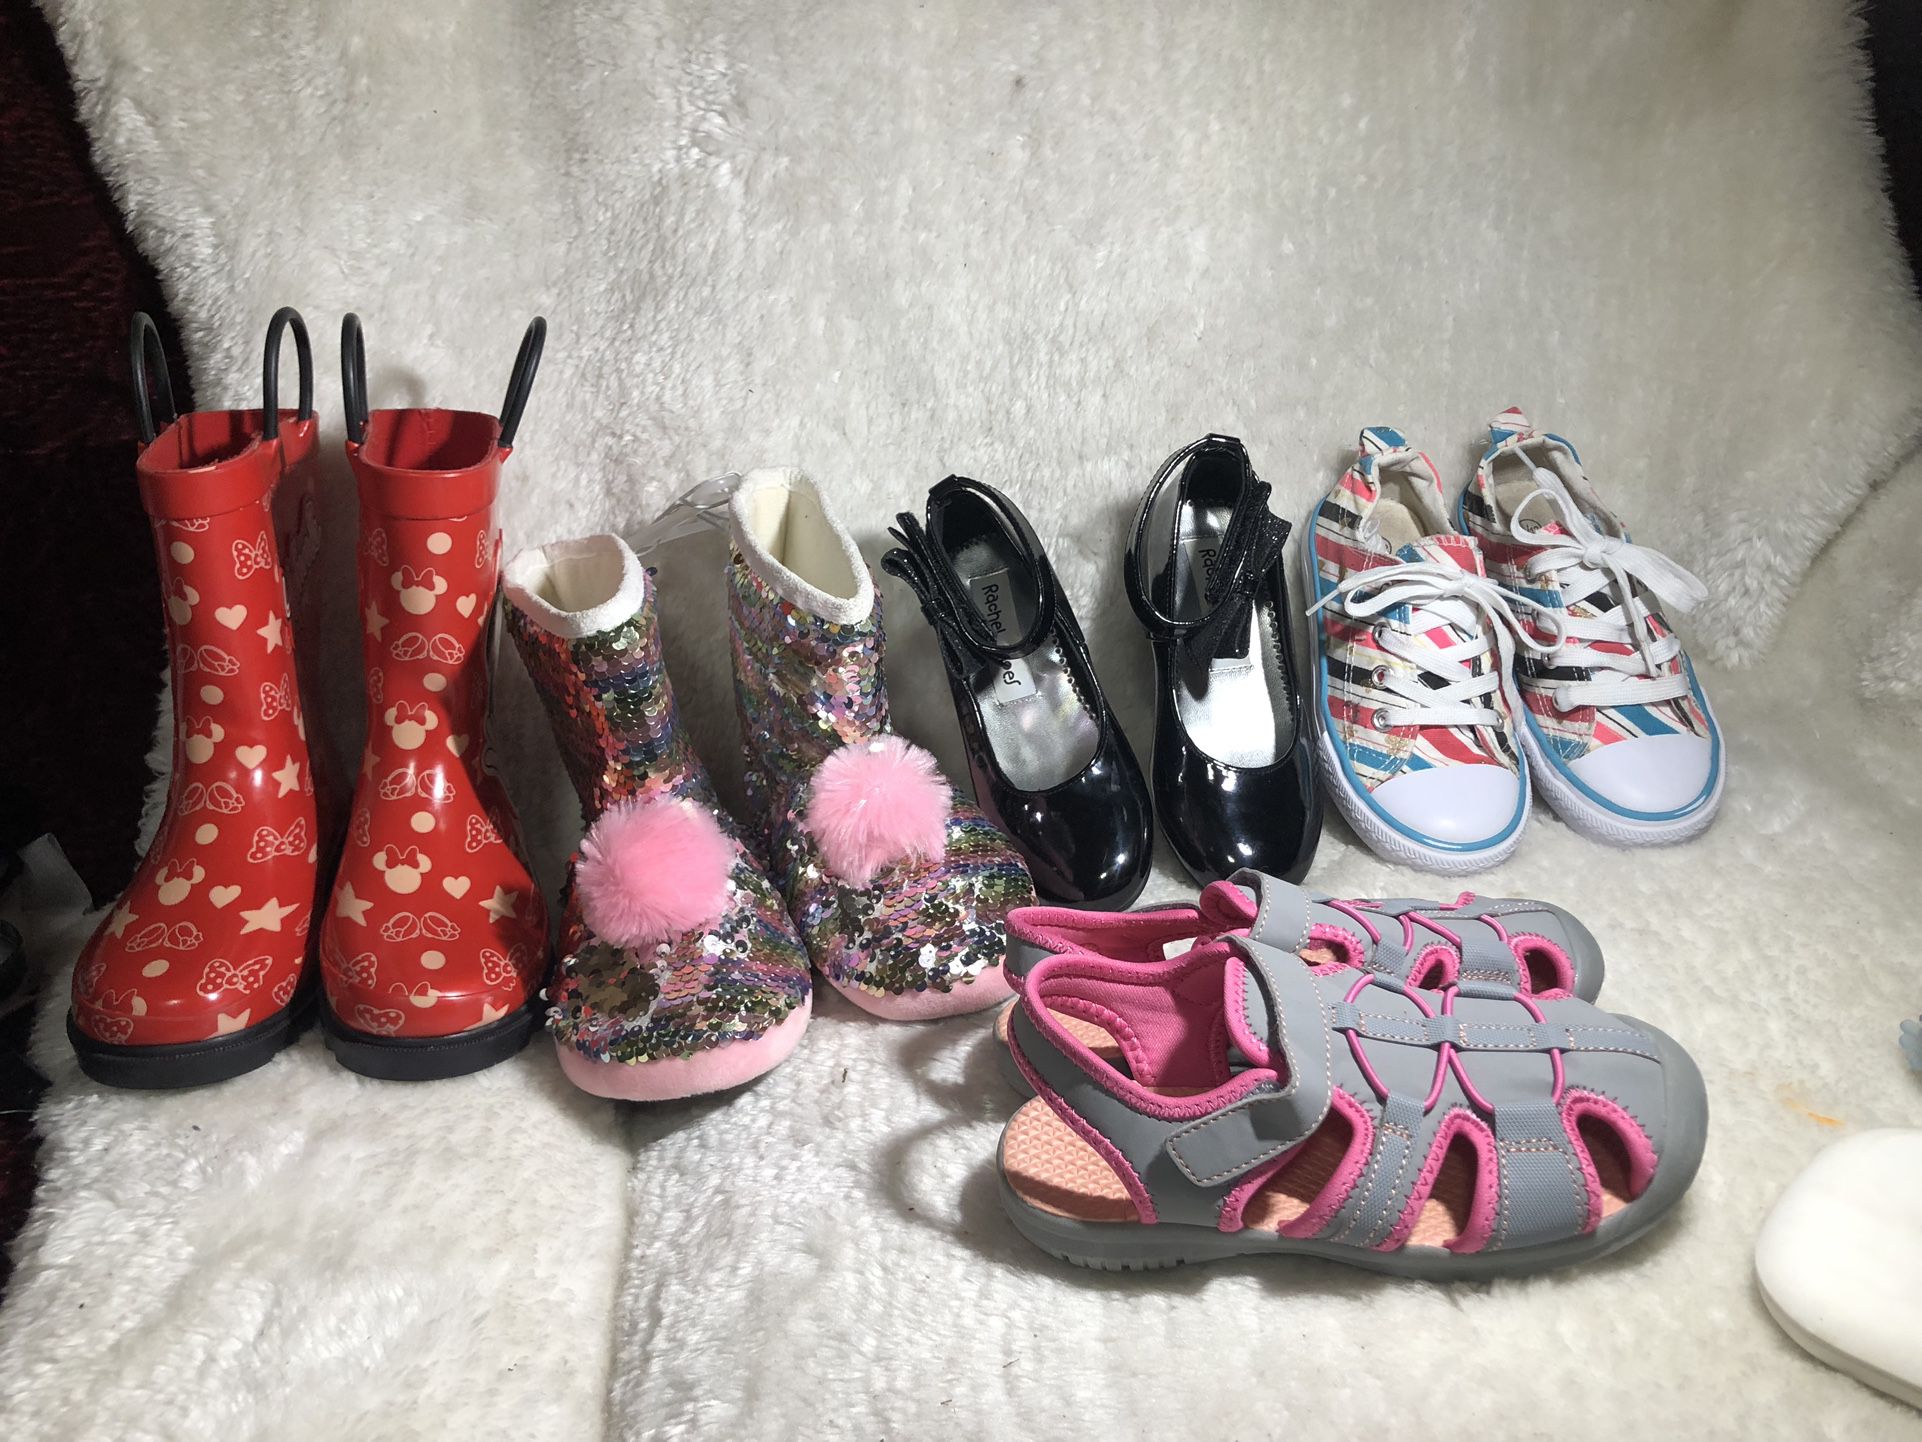 Minnie Rain Boots 12/sparkly Pom Slippers 12/rachel Dress Shoes 12/lily & Dan 12/rugged Outdoor Sandals 12